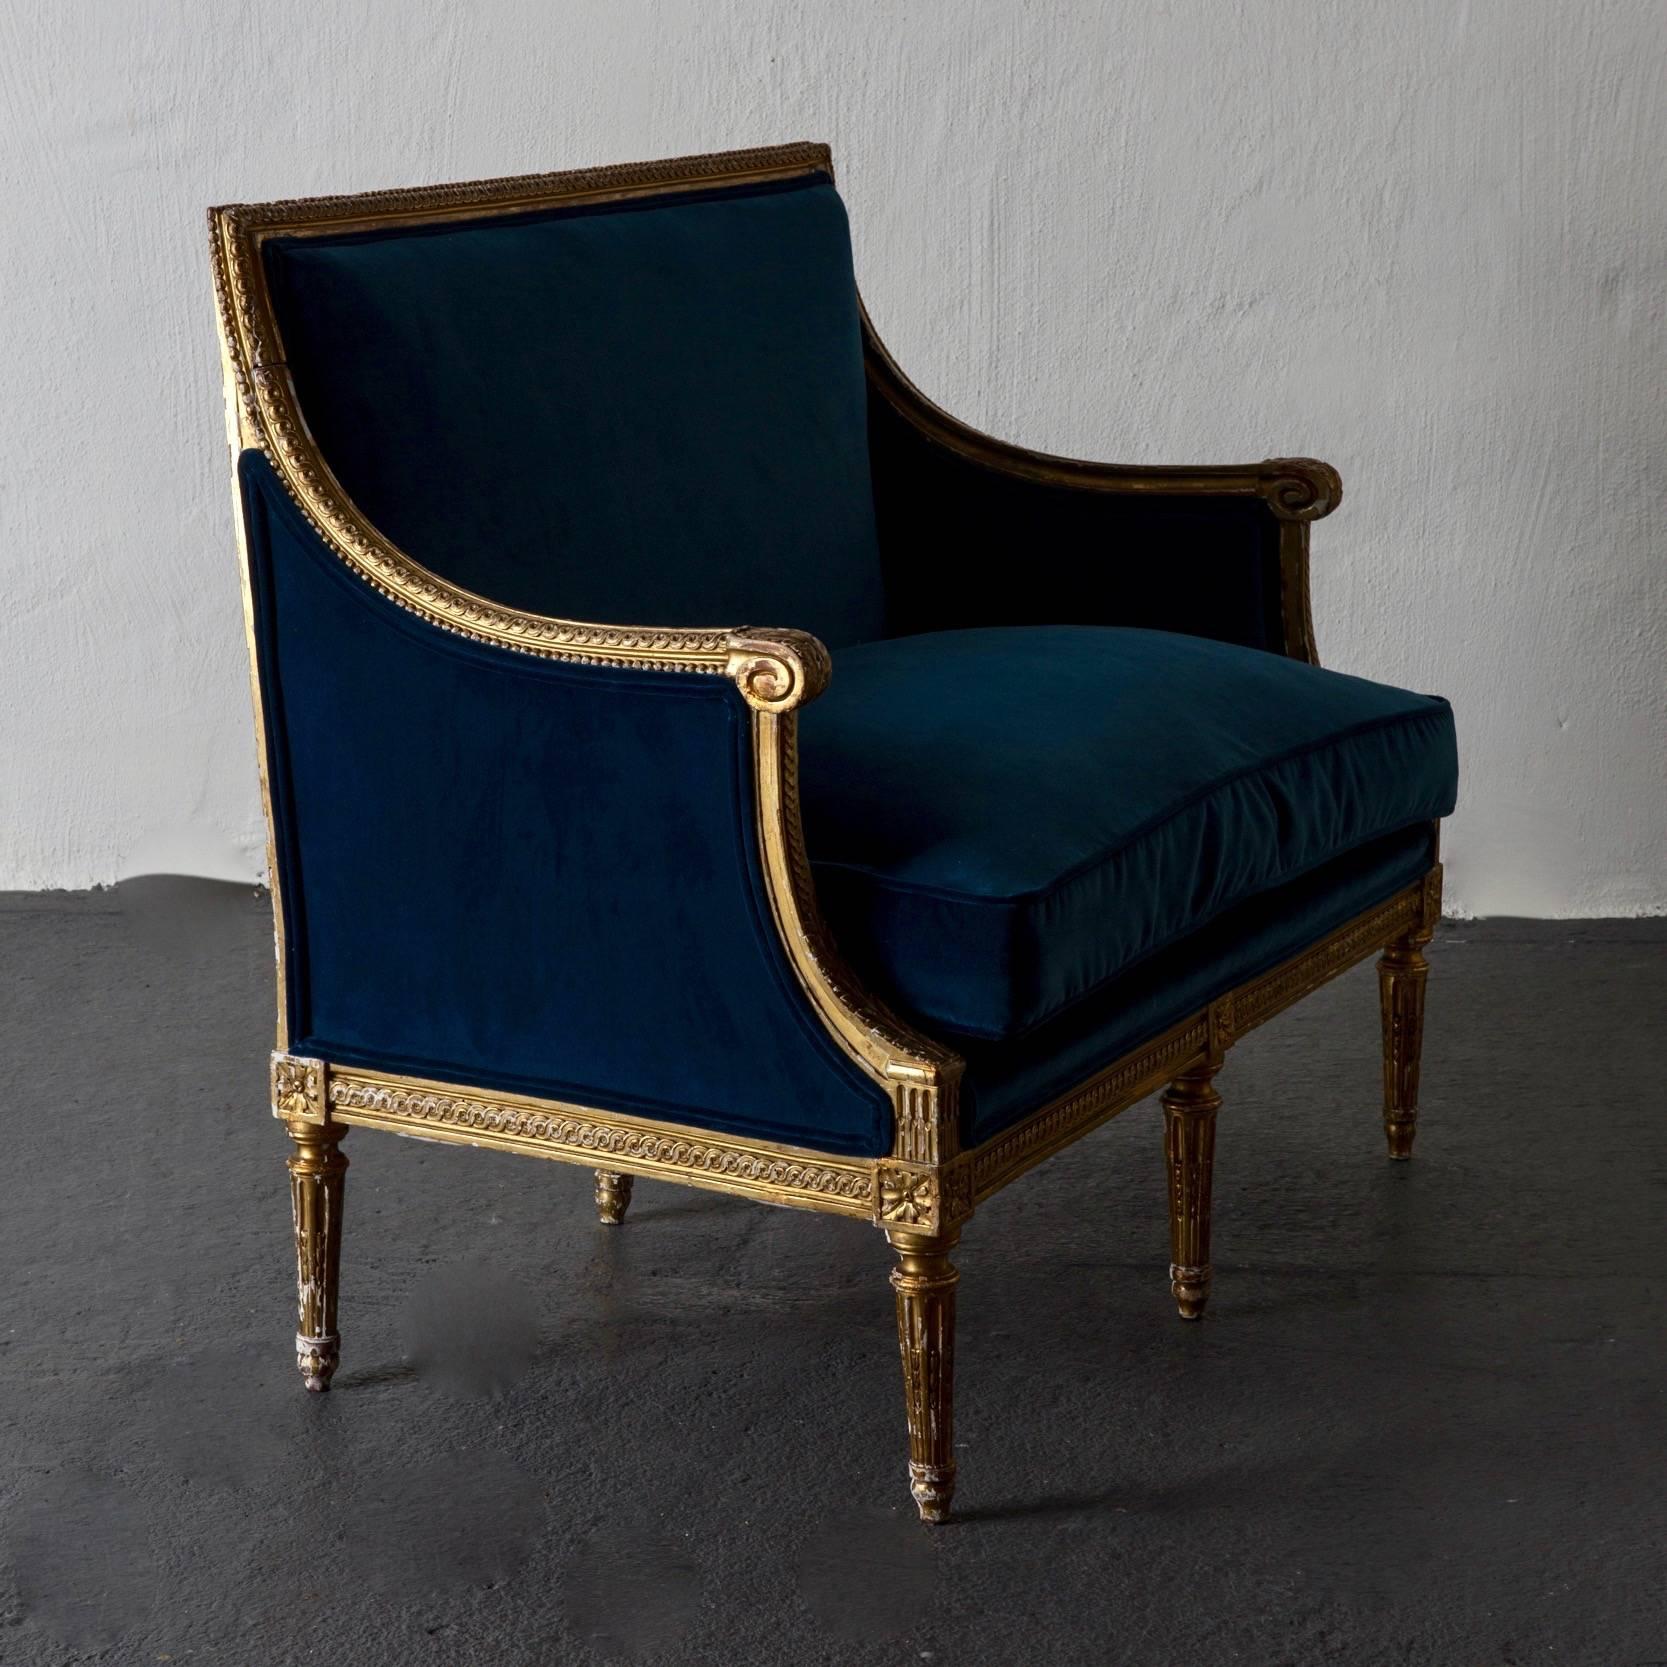 Sofa Bench Love Seat Neoclassical Louis XVI Period Gilt Wood Blue Velvet France. A sofa / love seat made during the louis XVI period. Gilt wood frame with carvings such as pearls beading board and channeled legs. Upholstered in a blue cotton